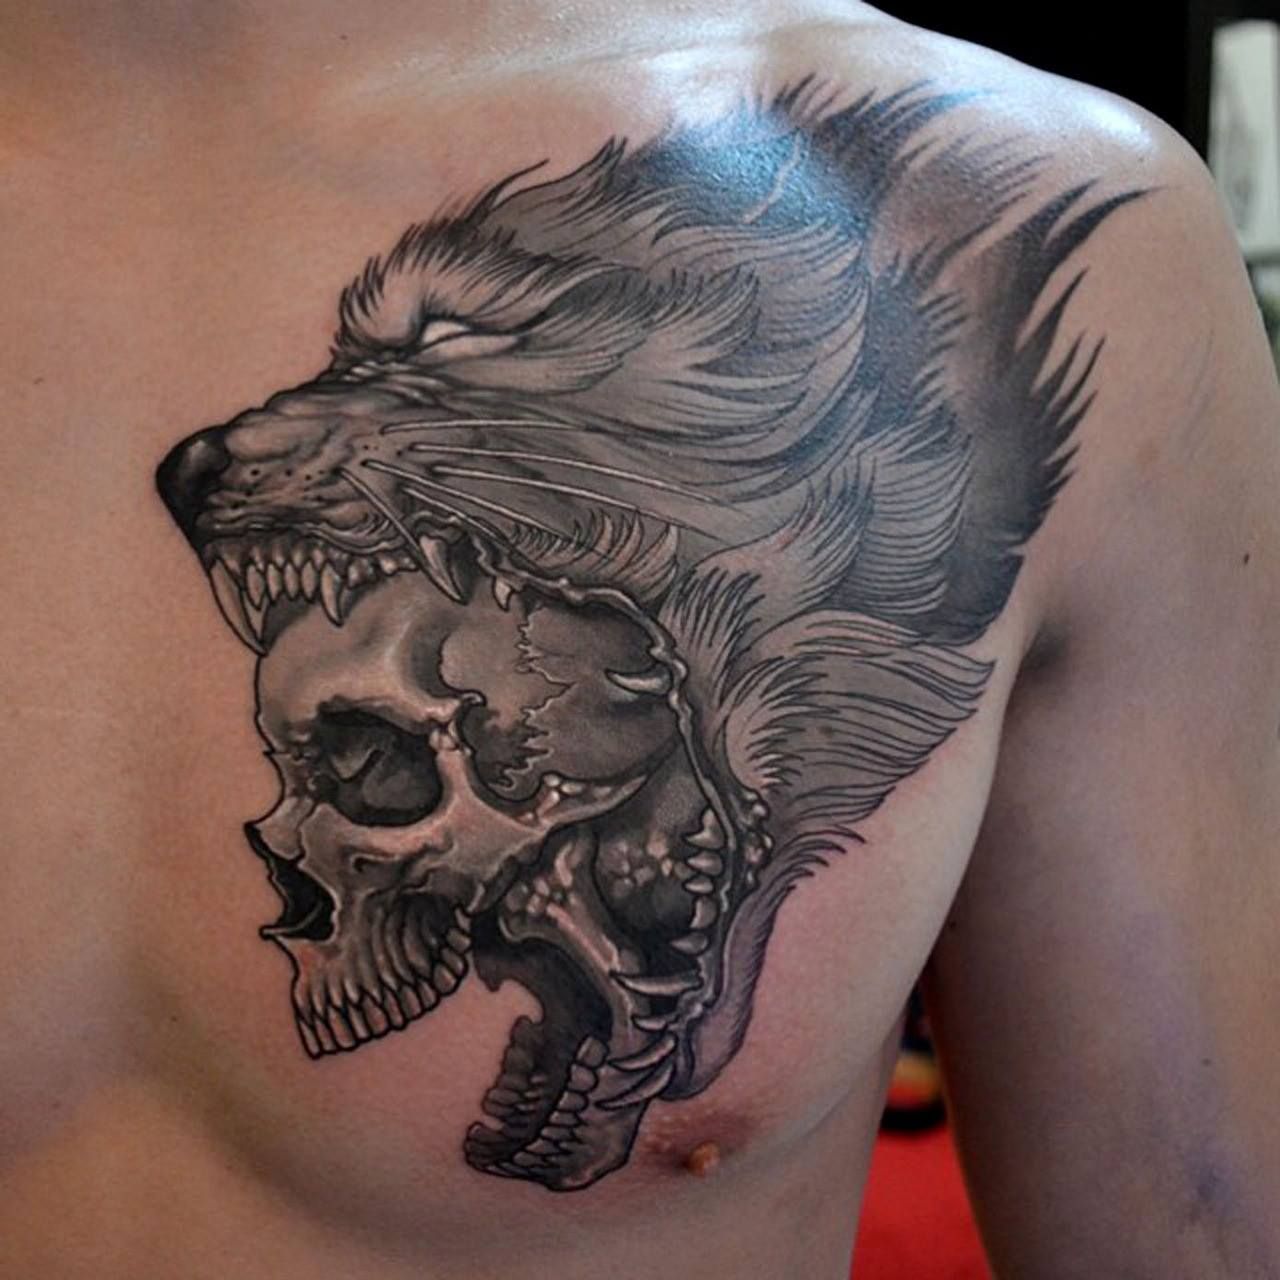 26 Amazing Body Artwork Pictures That Will Make you to Get a Tattoo Right